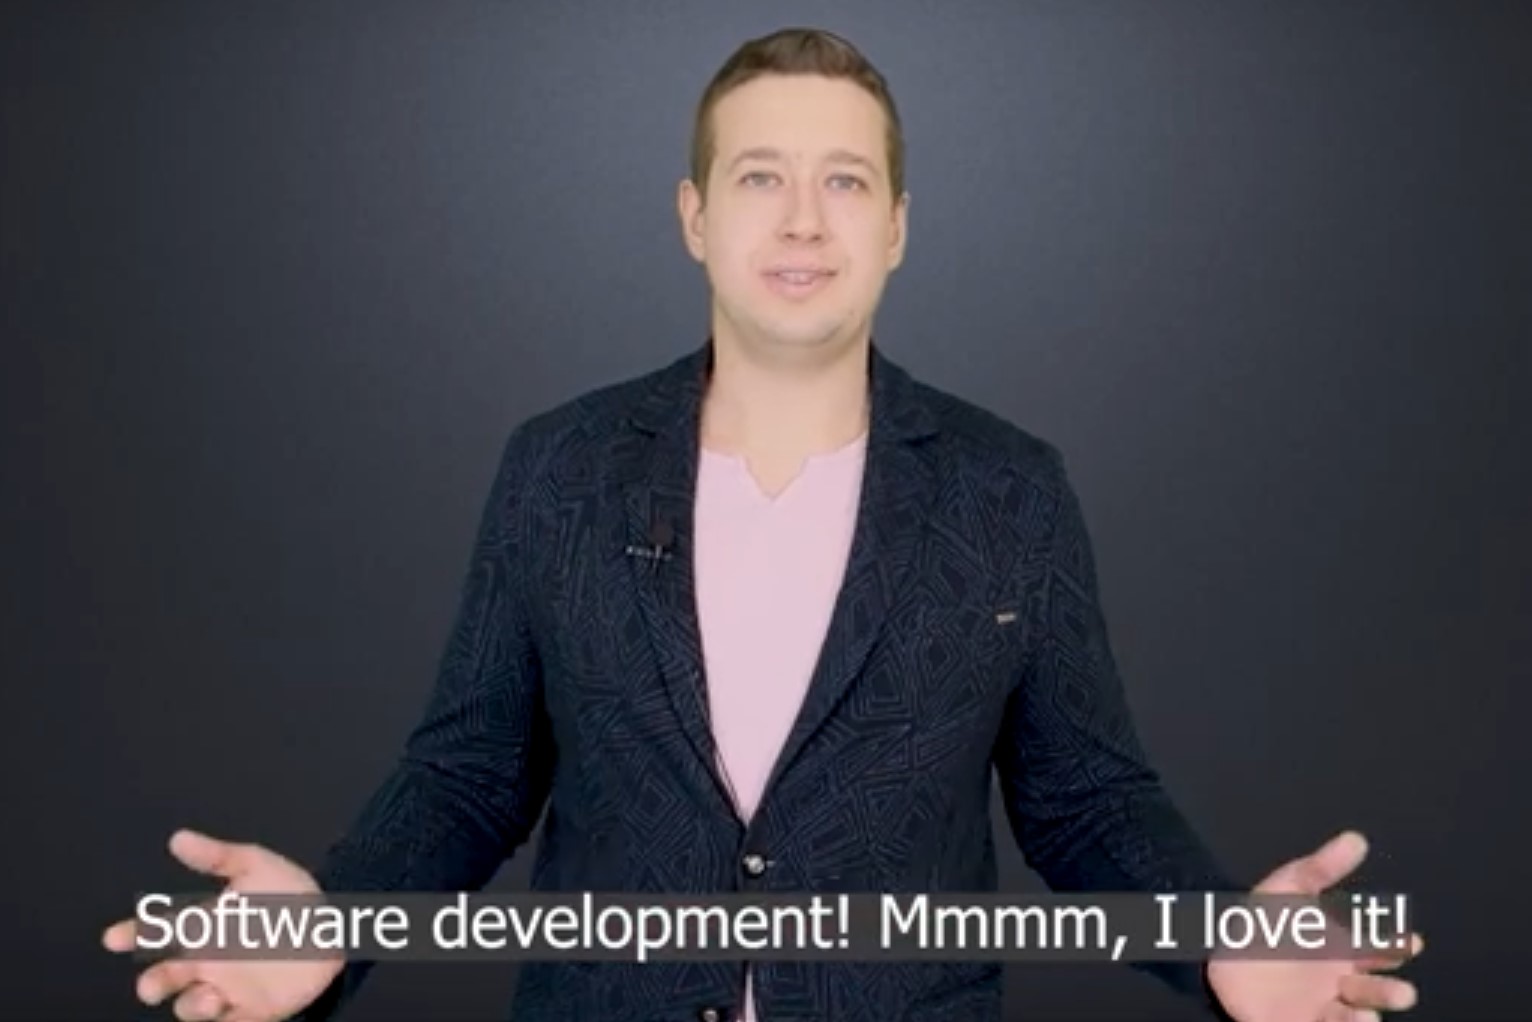 RoveTek CEO Dmitriy Shvager talks about software development (in our new YouTube channel!)